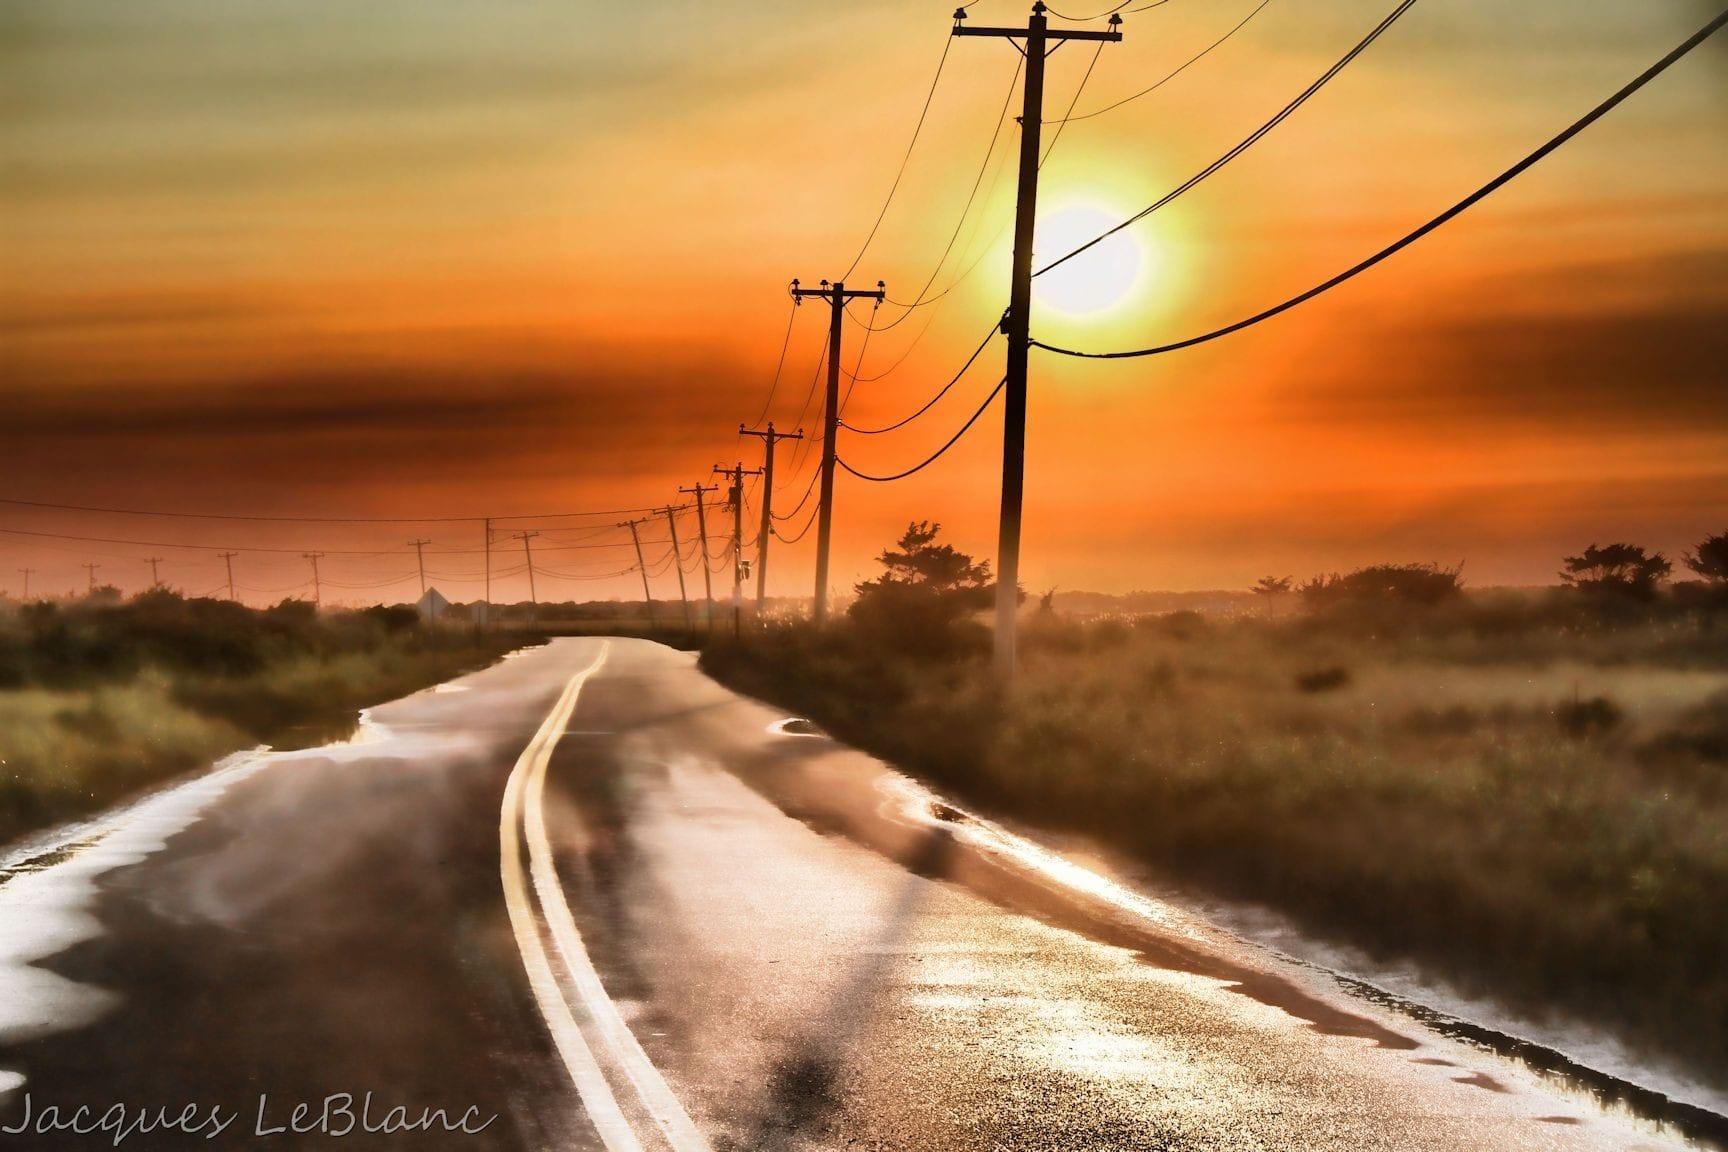 A passing summer rainstorm has left Dune Road in Hampton Bays glistening and full of puddles and unveils a red sky sunset behind a line of telephone poles.